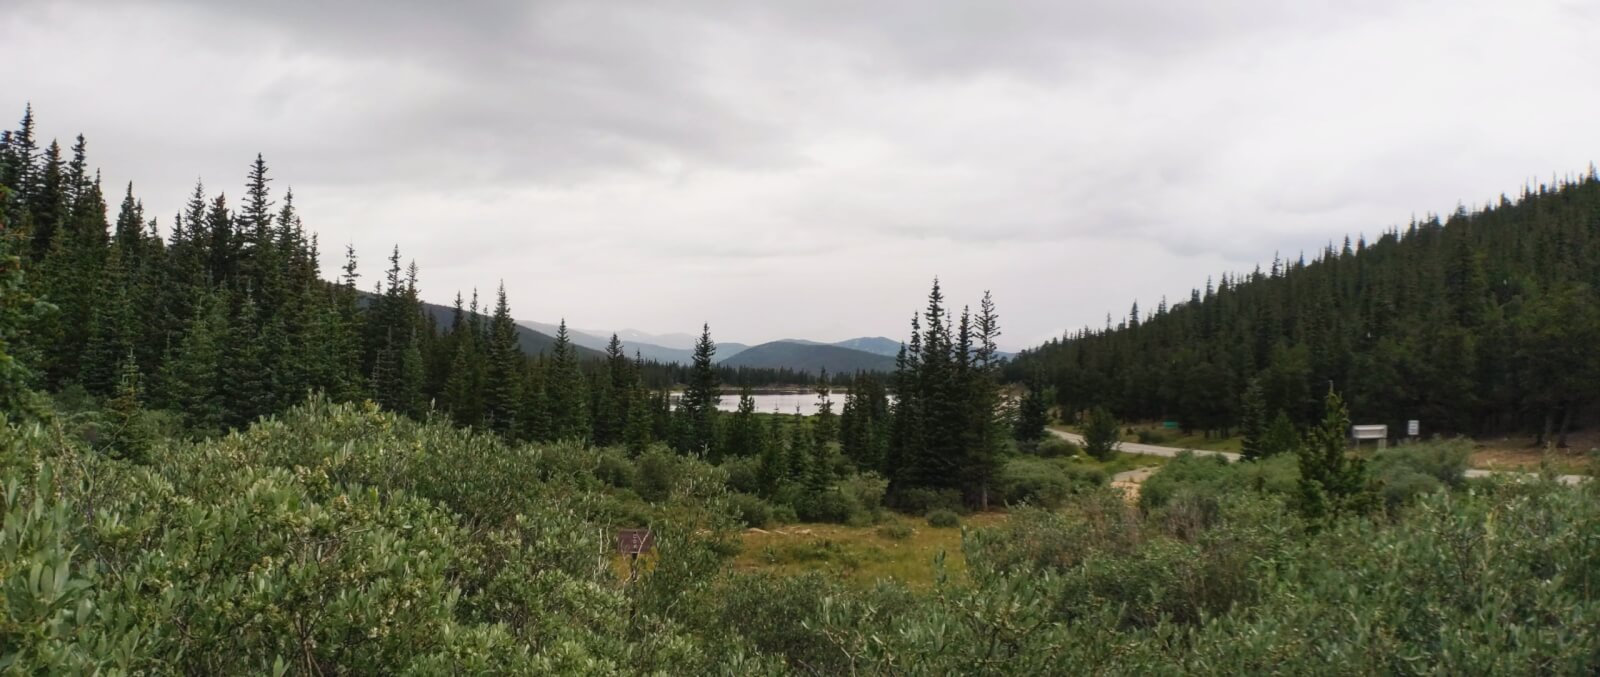 Squaw pass in the summer on a cloudy day with green foliage and a lake in the back